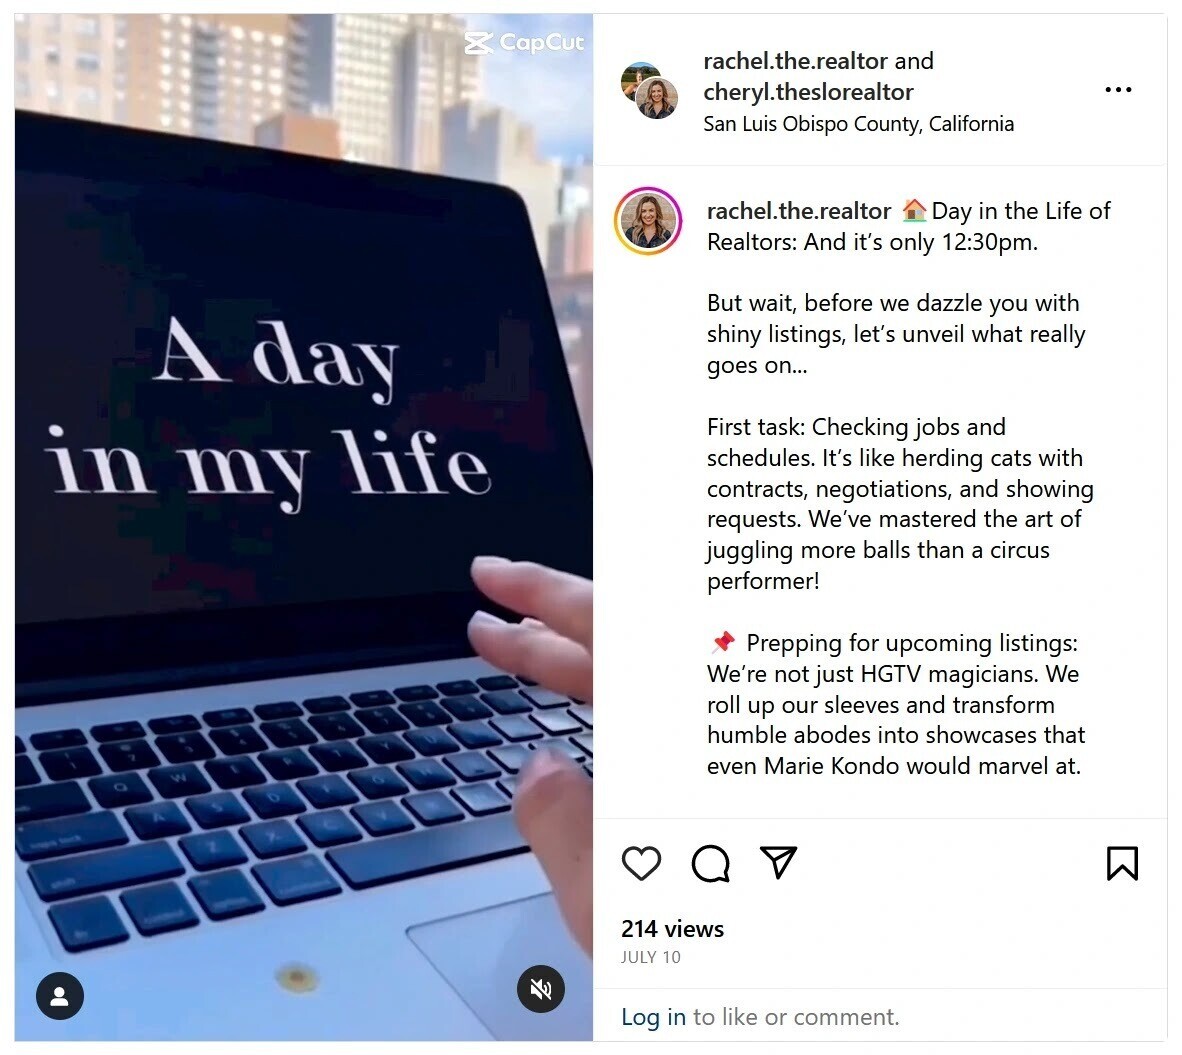 An example of an “Day in the Life of a Realtor” Instagram video